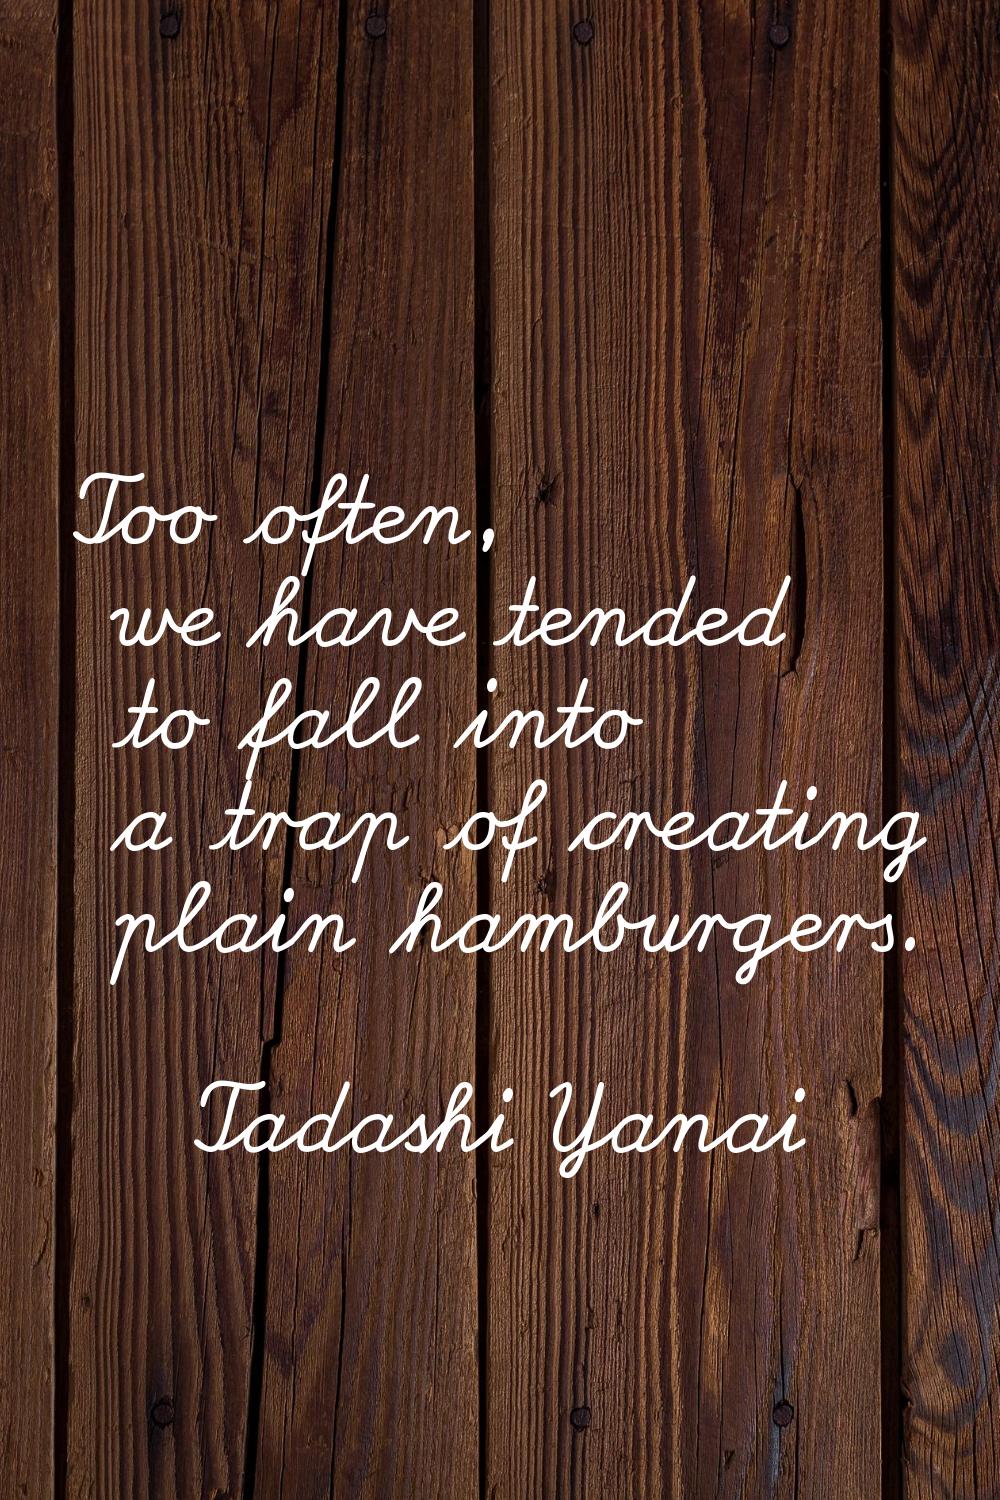 Too often, we have tended to fall into a trap of creating plain hamburgers.